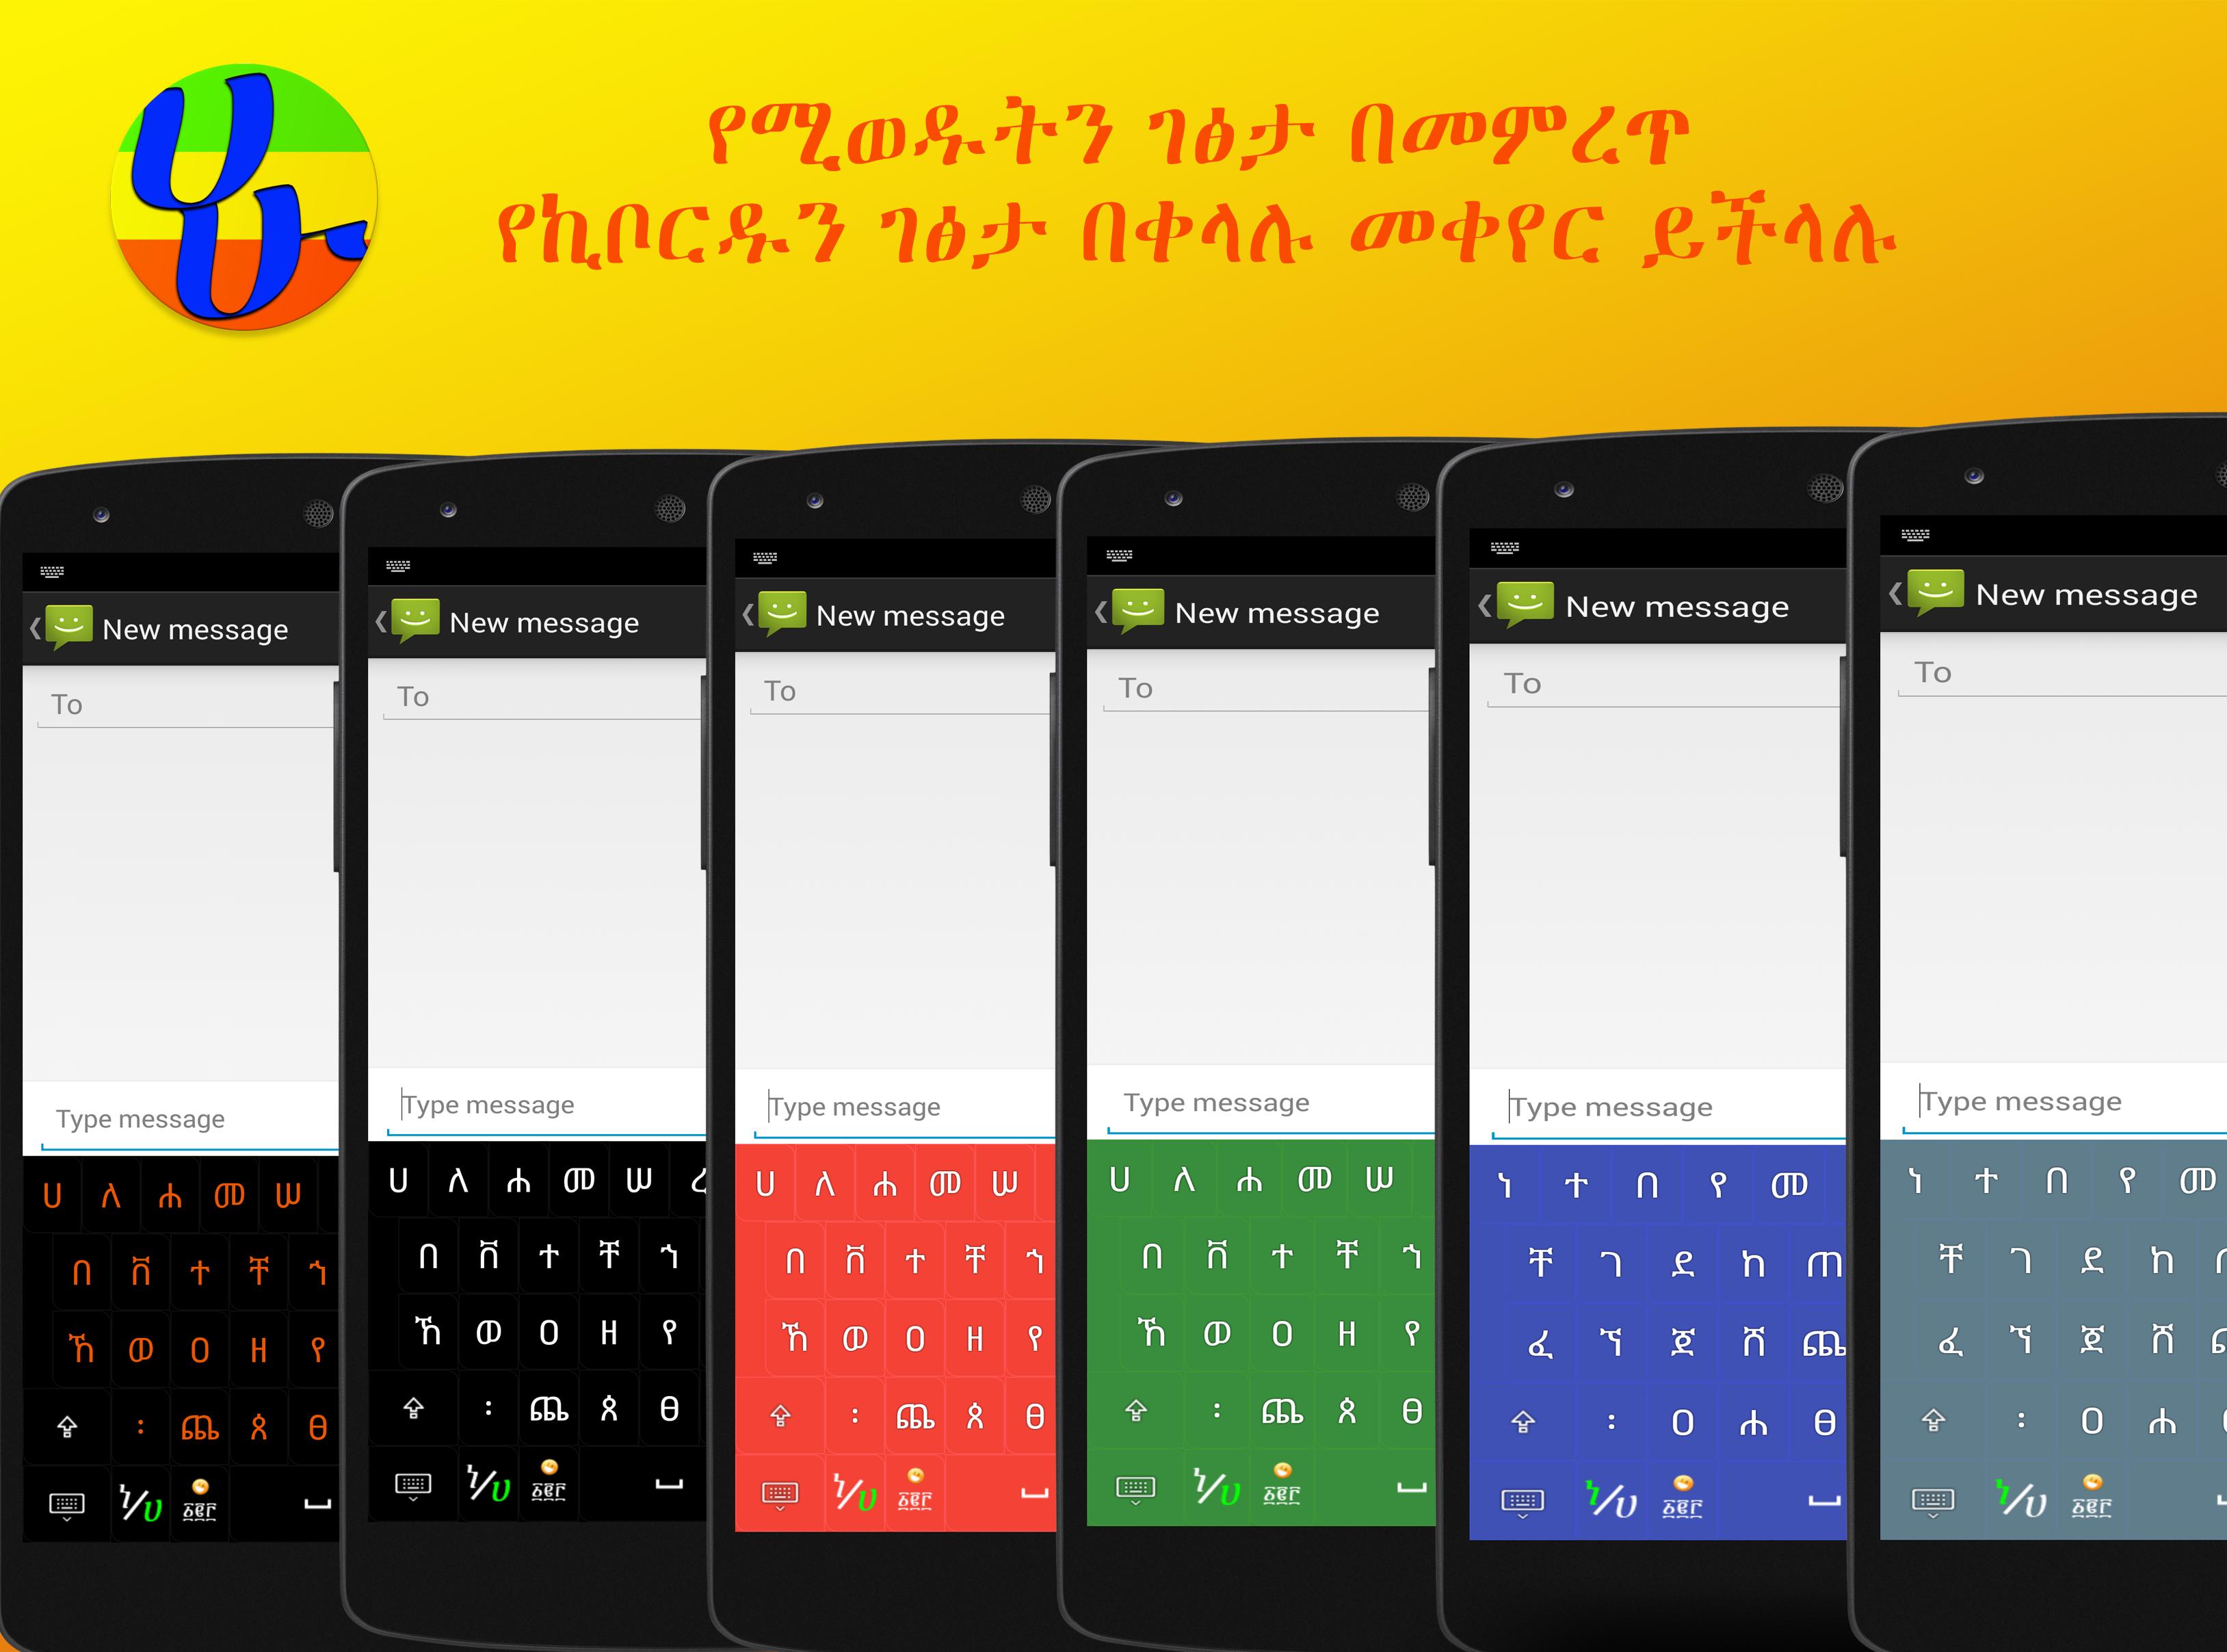 HaHu Amharic Keyboard for Android - APK Download